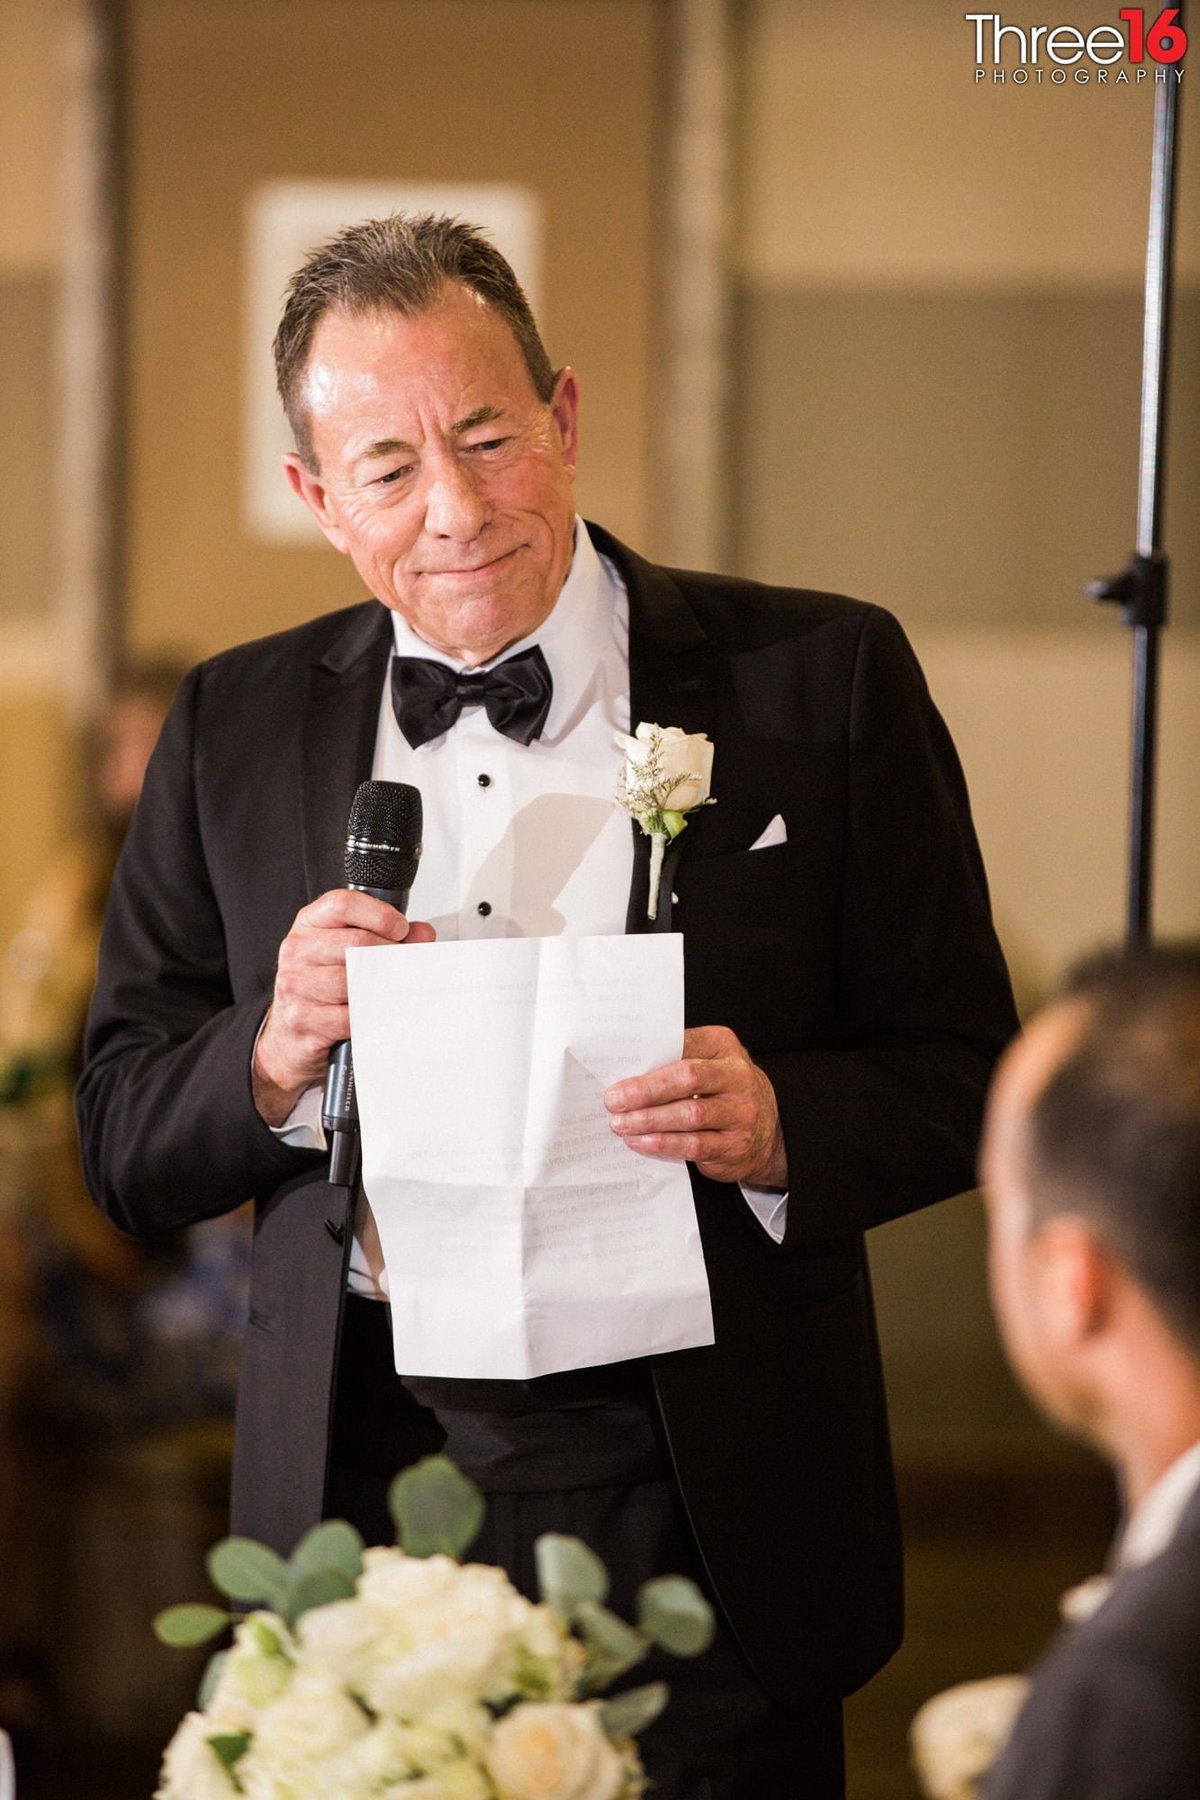 A special reading from dad at a wedding